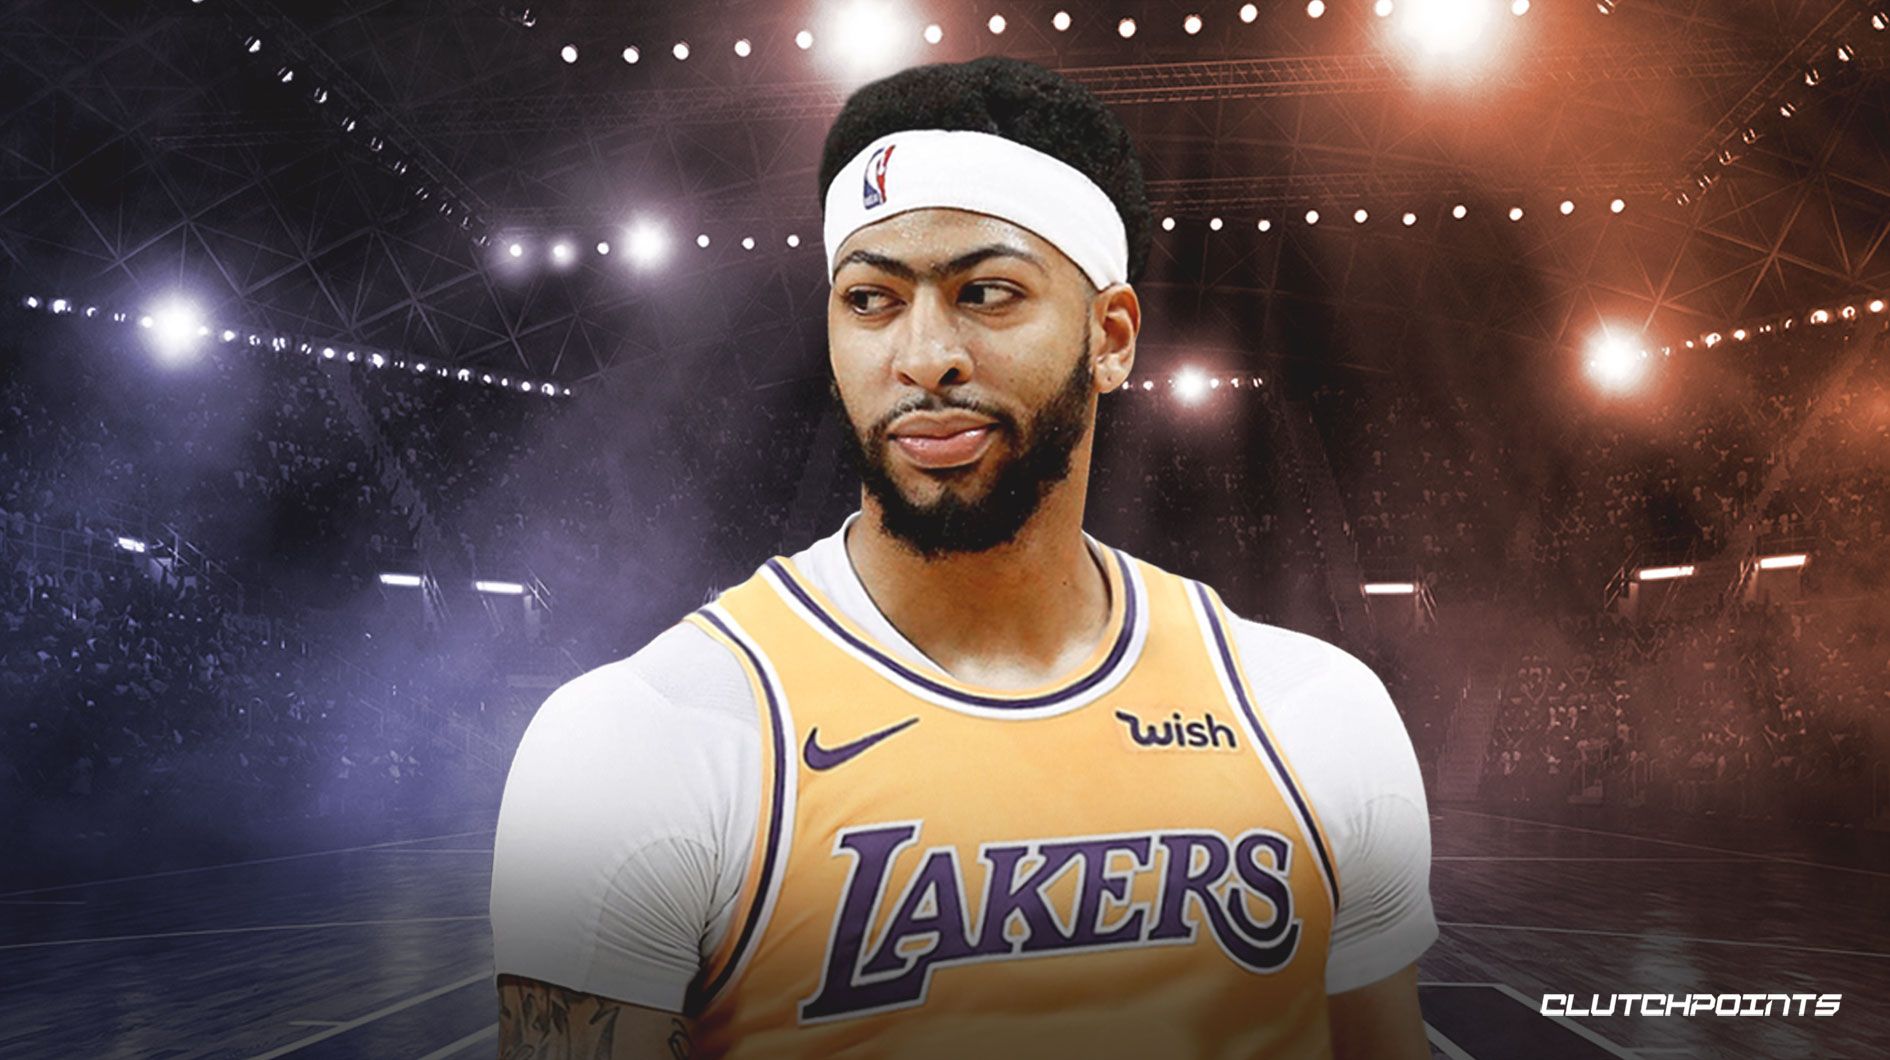 Anthony Davis' time to build his legacy is now or never with the Lakers